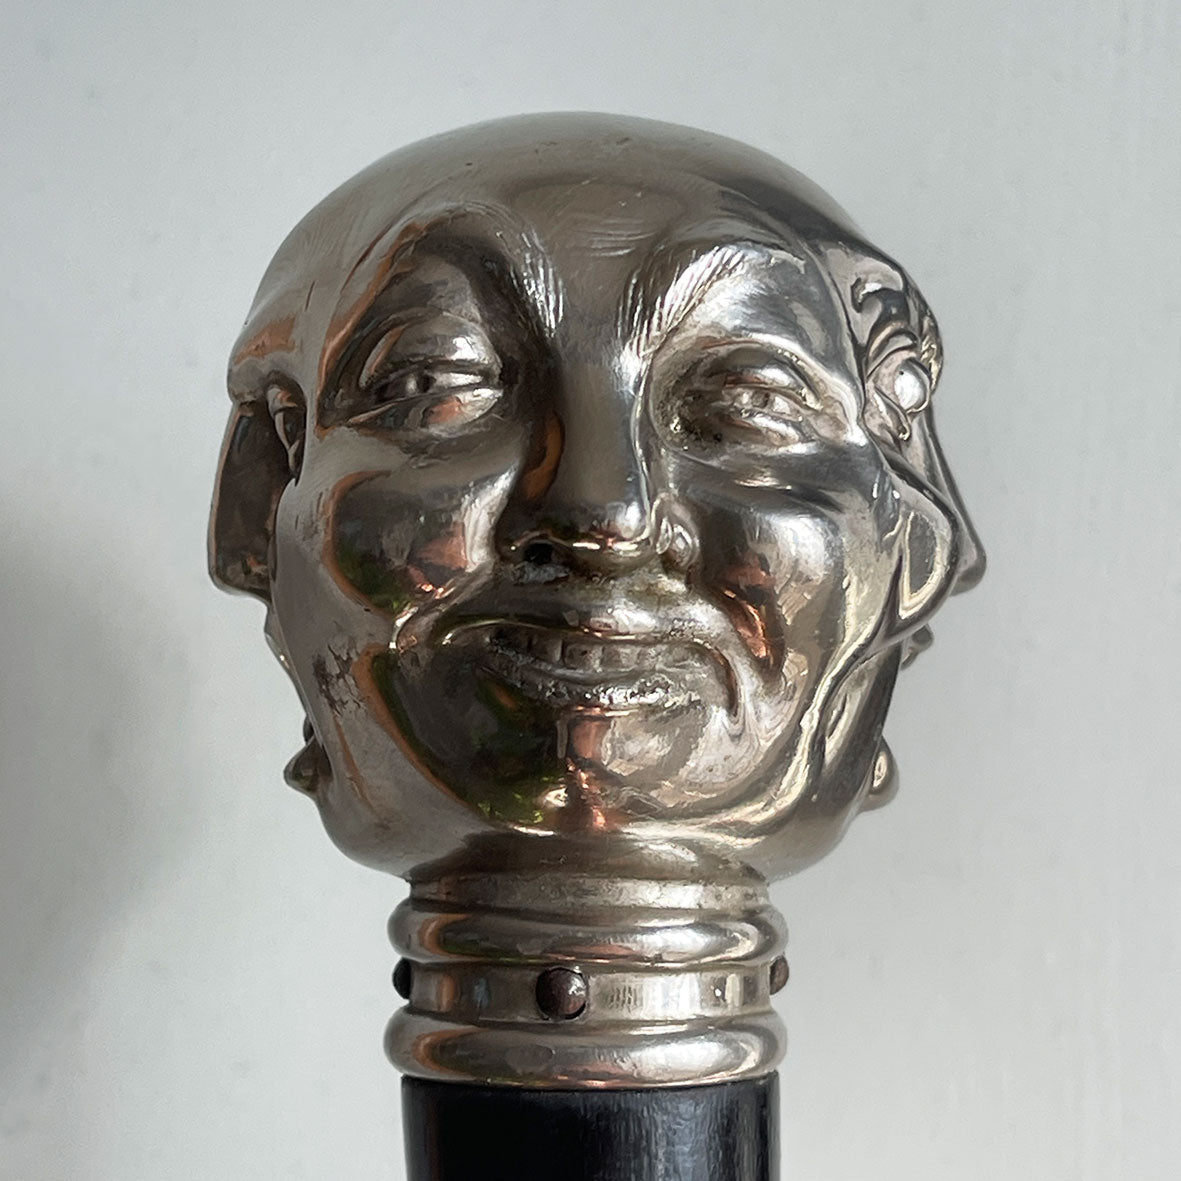 A Victorian Page Turner from around the 1870 period. A silvered head showing four characterful faces sits atop an ebonised wooden blade. The faces represent mirth, sadness, shock and anger - SHOP NOW - www.intovintage.co.uk